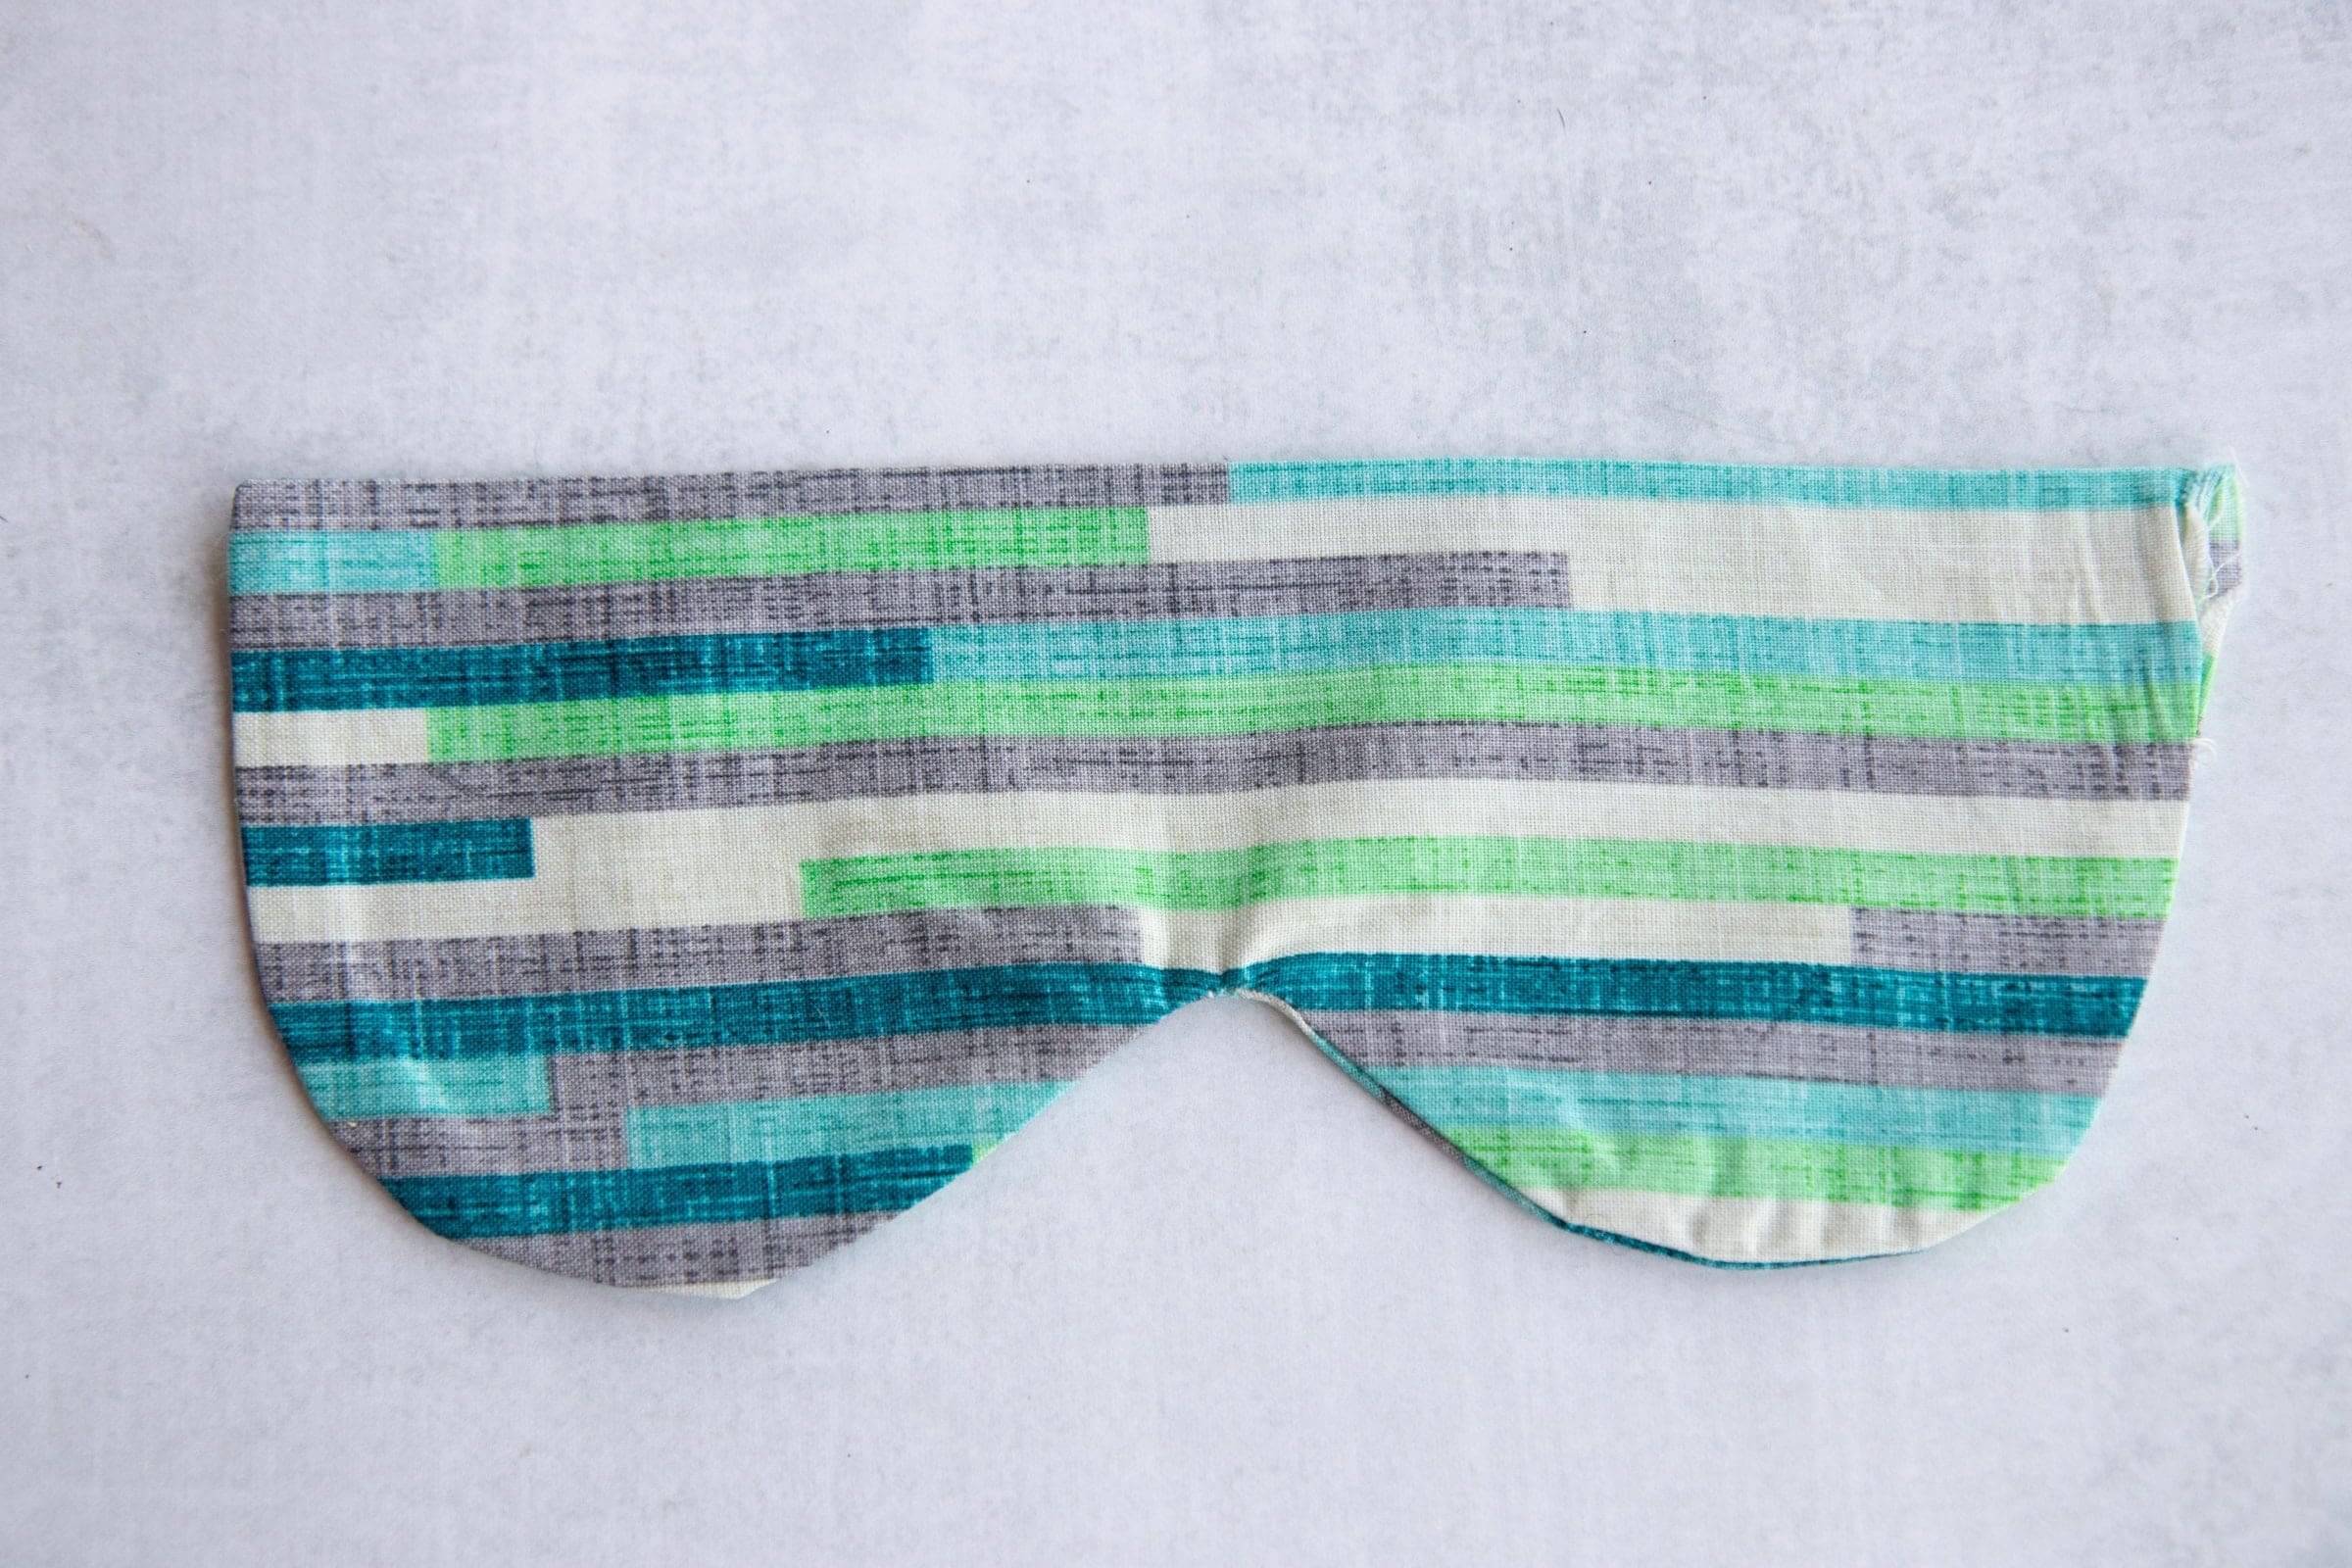 Blue, green, white, and grey Soothing Headache Eye Masks sewn together but unfilled